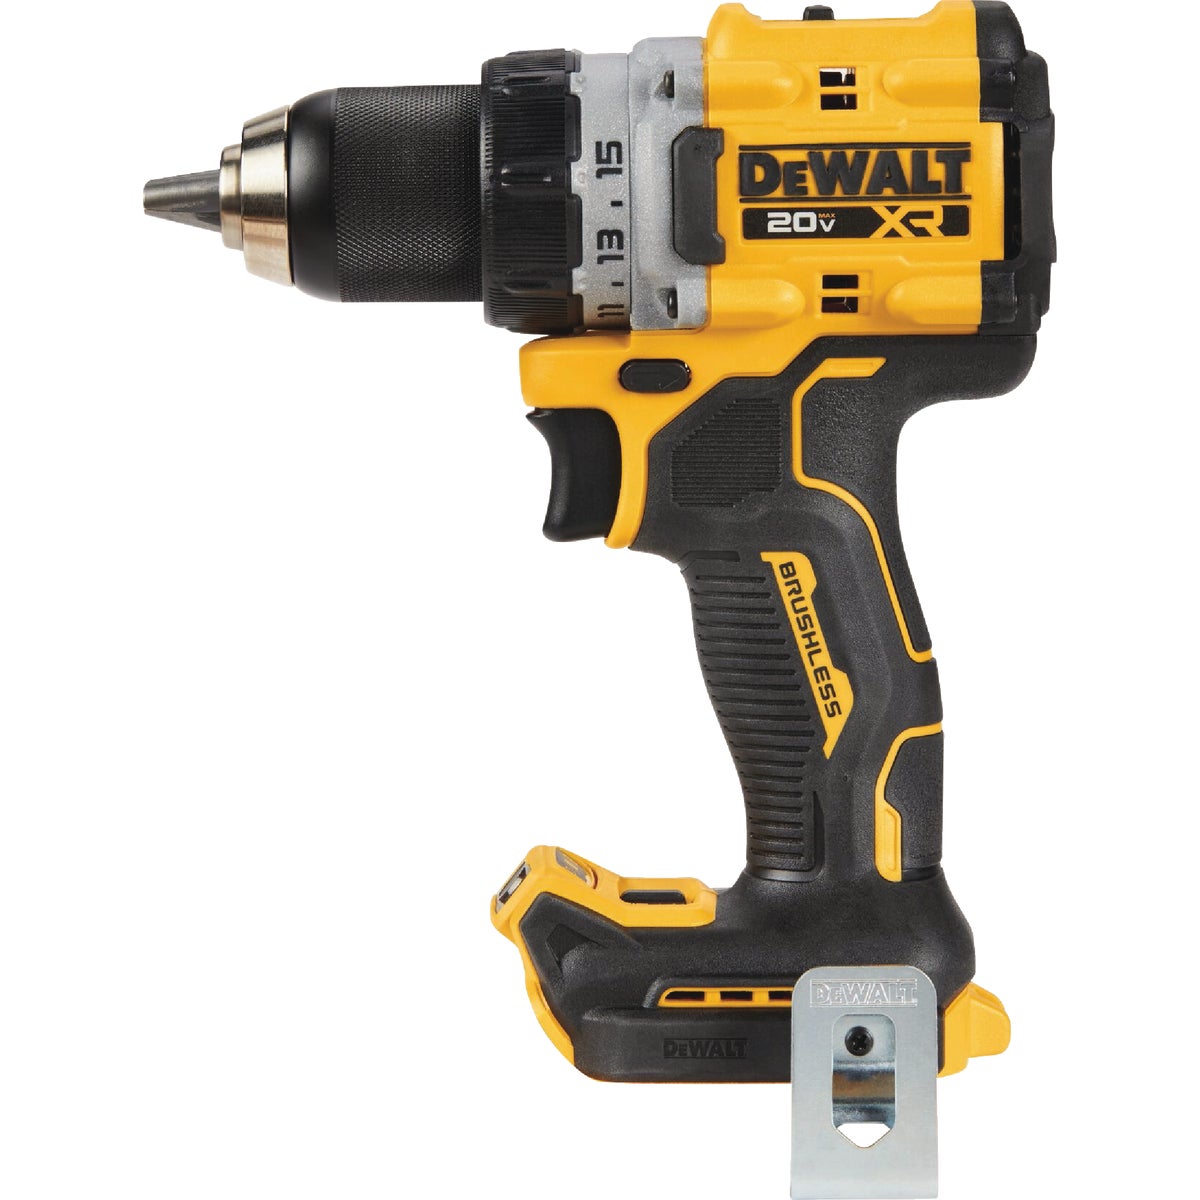 DEWALT 20V MAX XR Brushless 1/2 In. Compact Cordless Drill/Driver